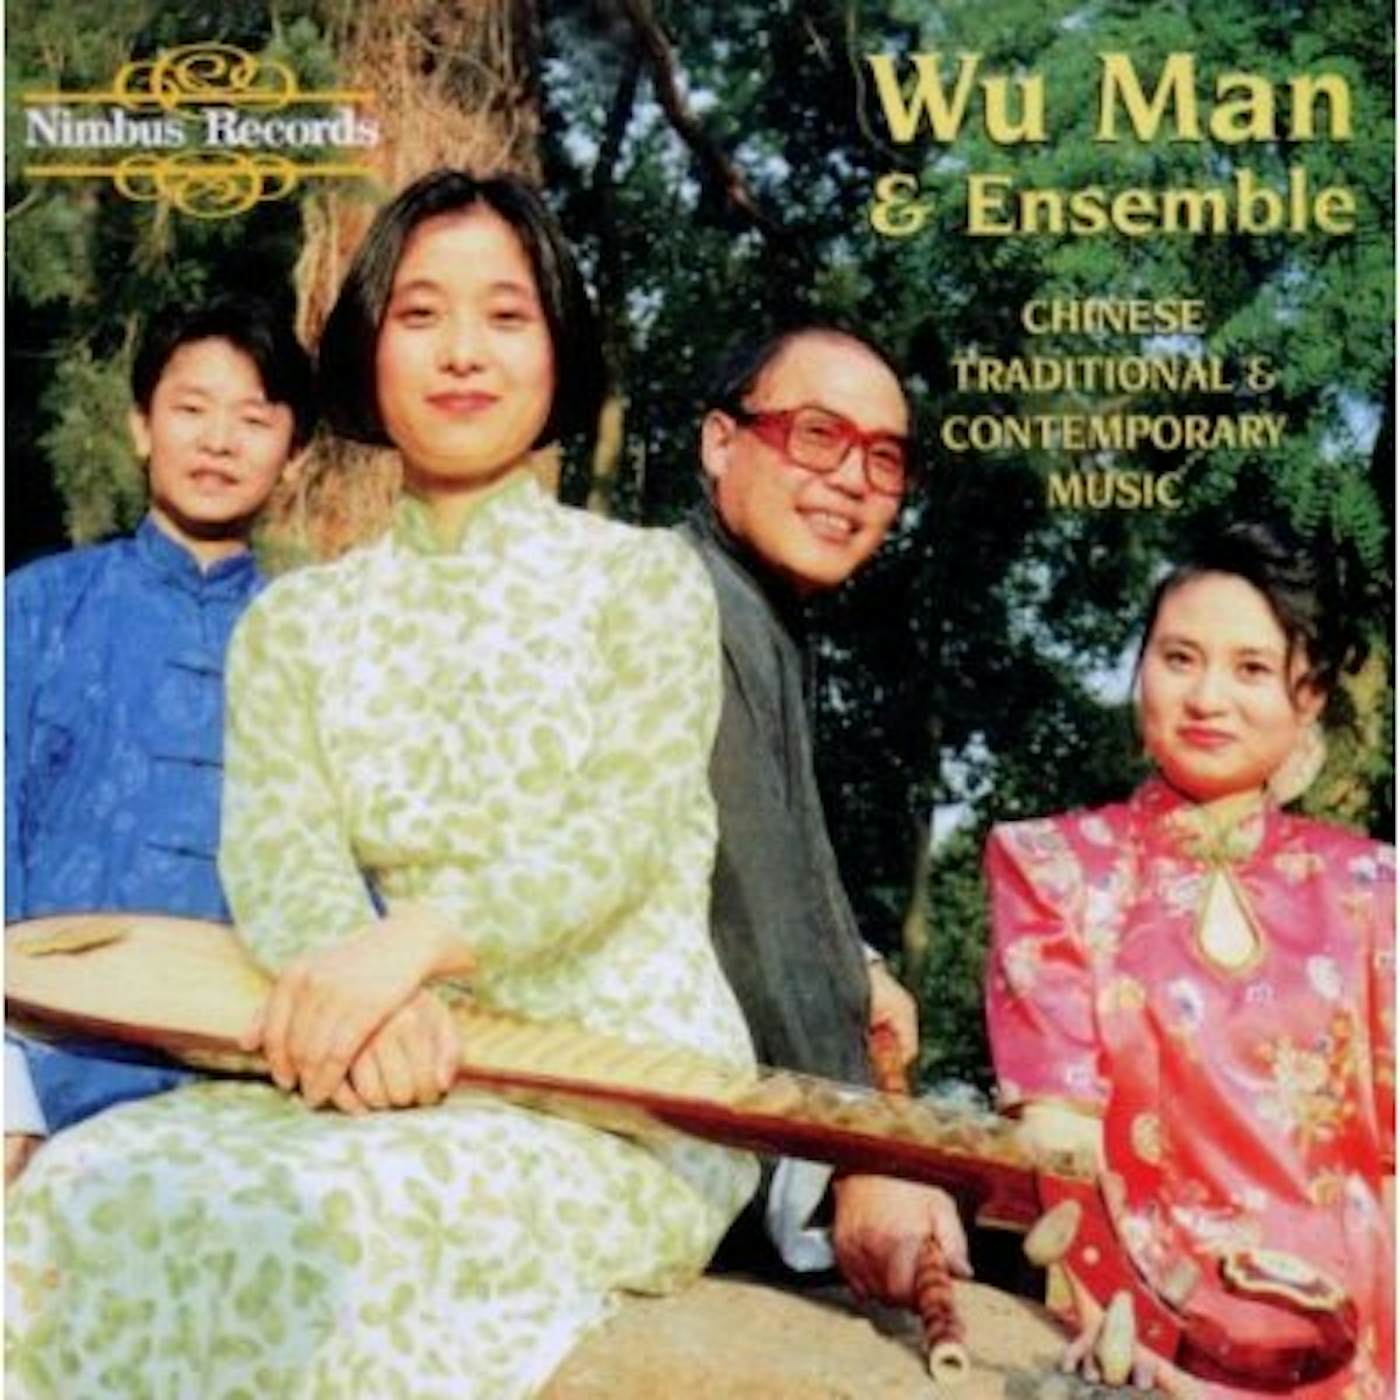 Wu Man CHINESE TRADITIONAL & CONTEMPORARY MUSIC CD